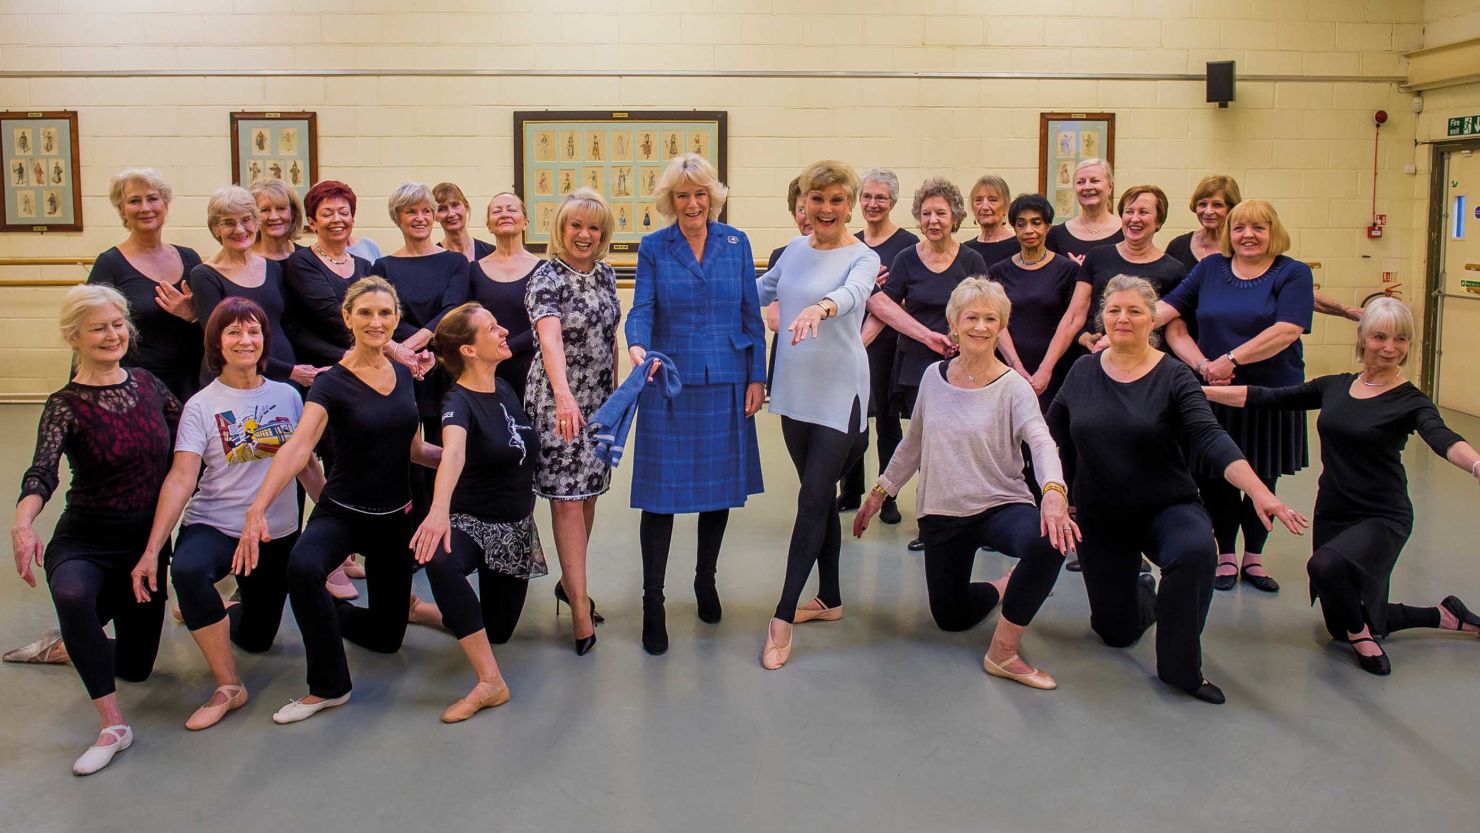 The Duchess of Cornwall visited London's Royal Academy of Dance in 2018.